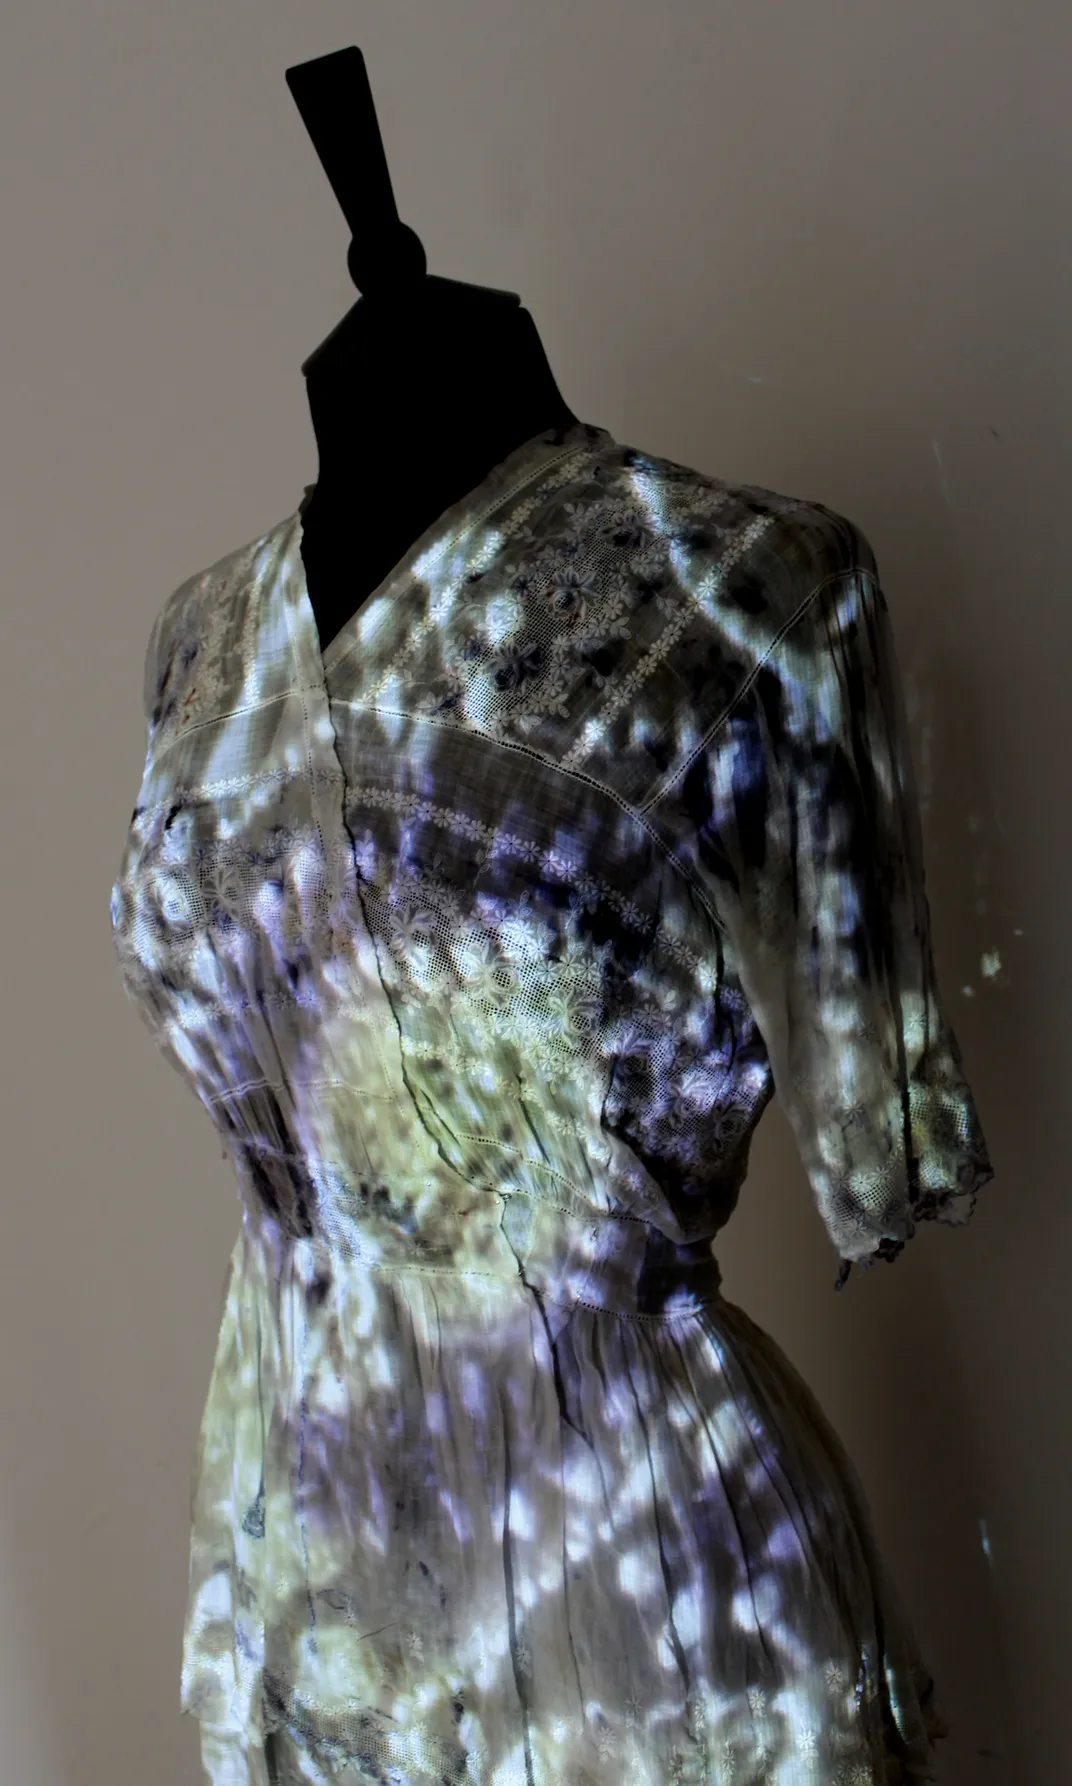 An Artist Dyes Clothes and Quilts With Tuberculosis and Staph Bacteria